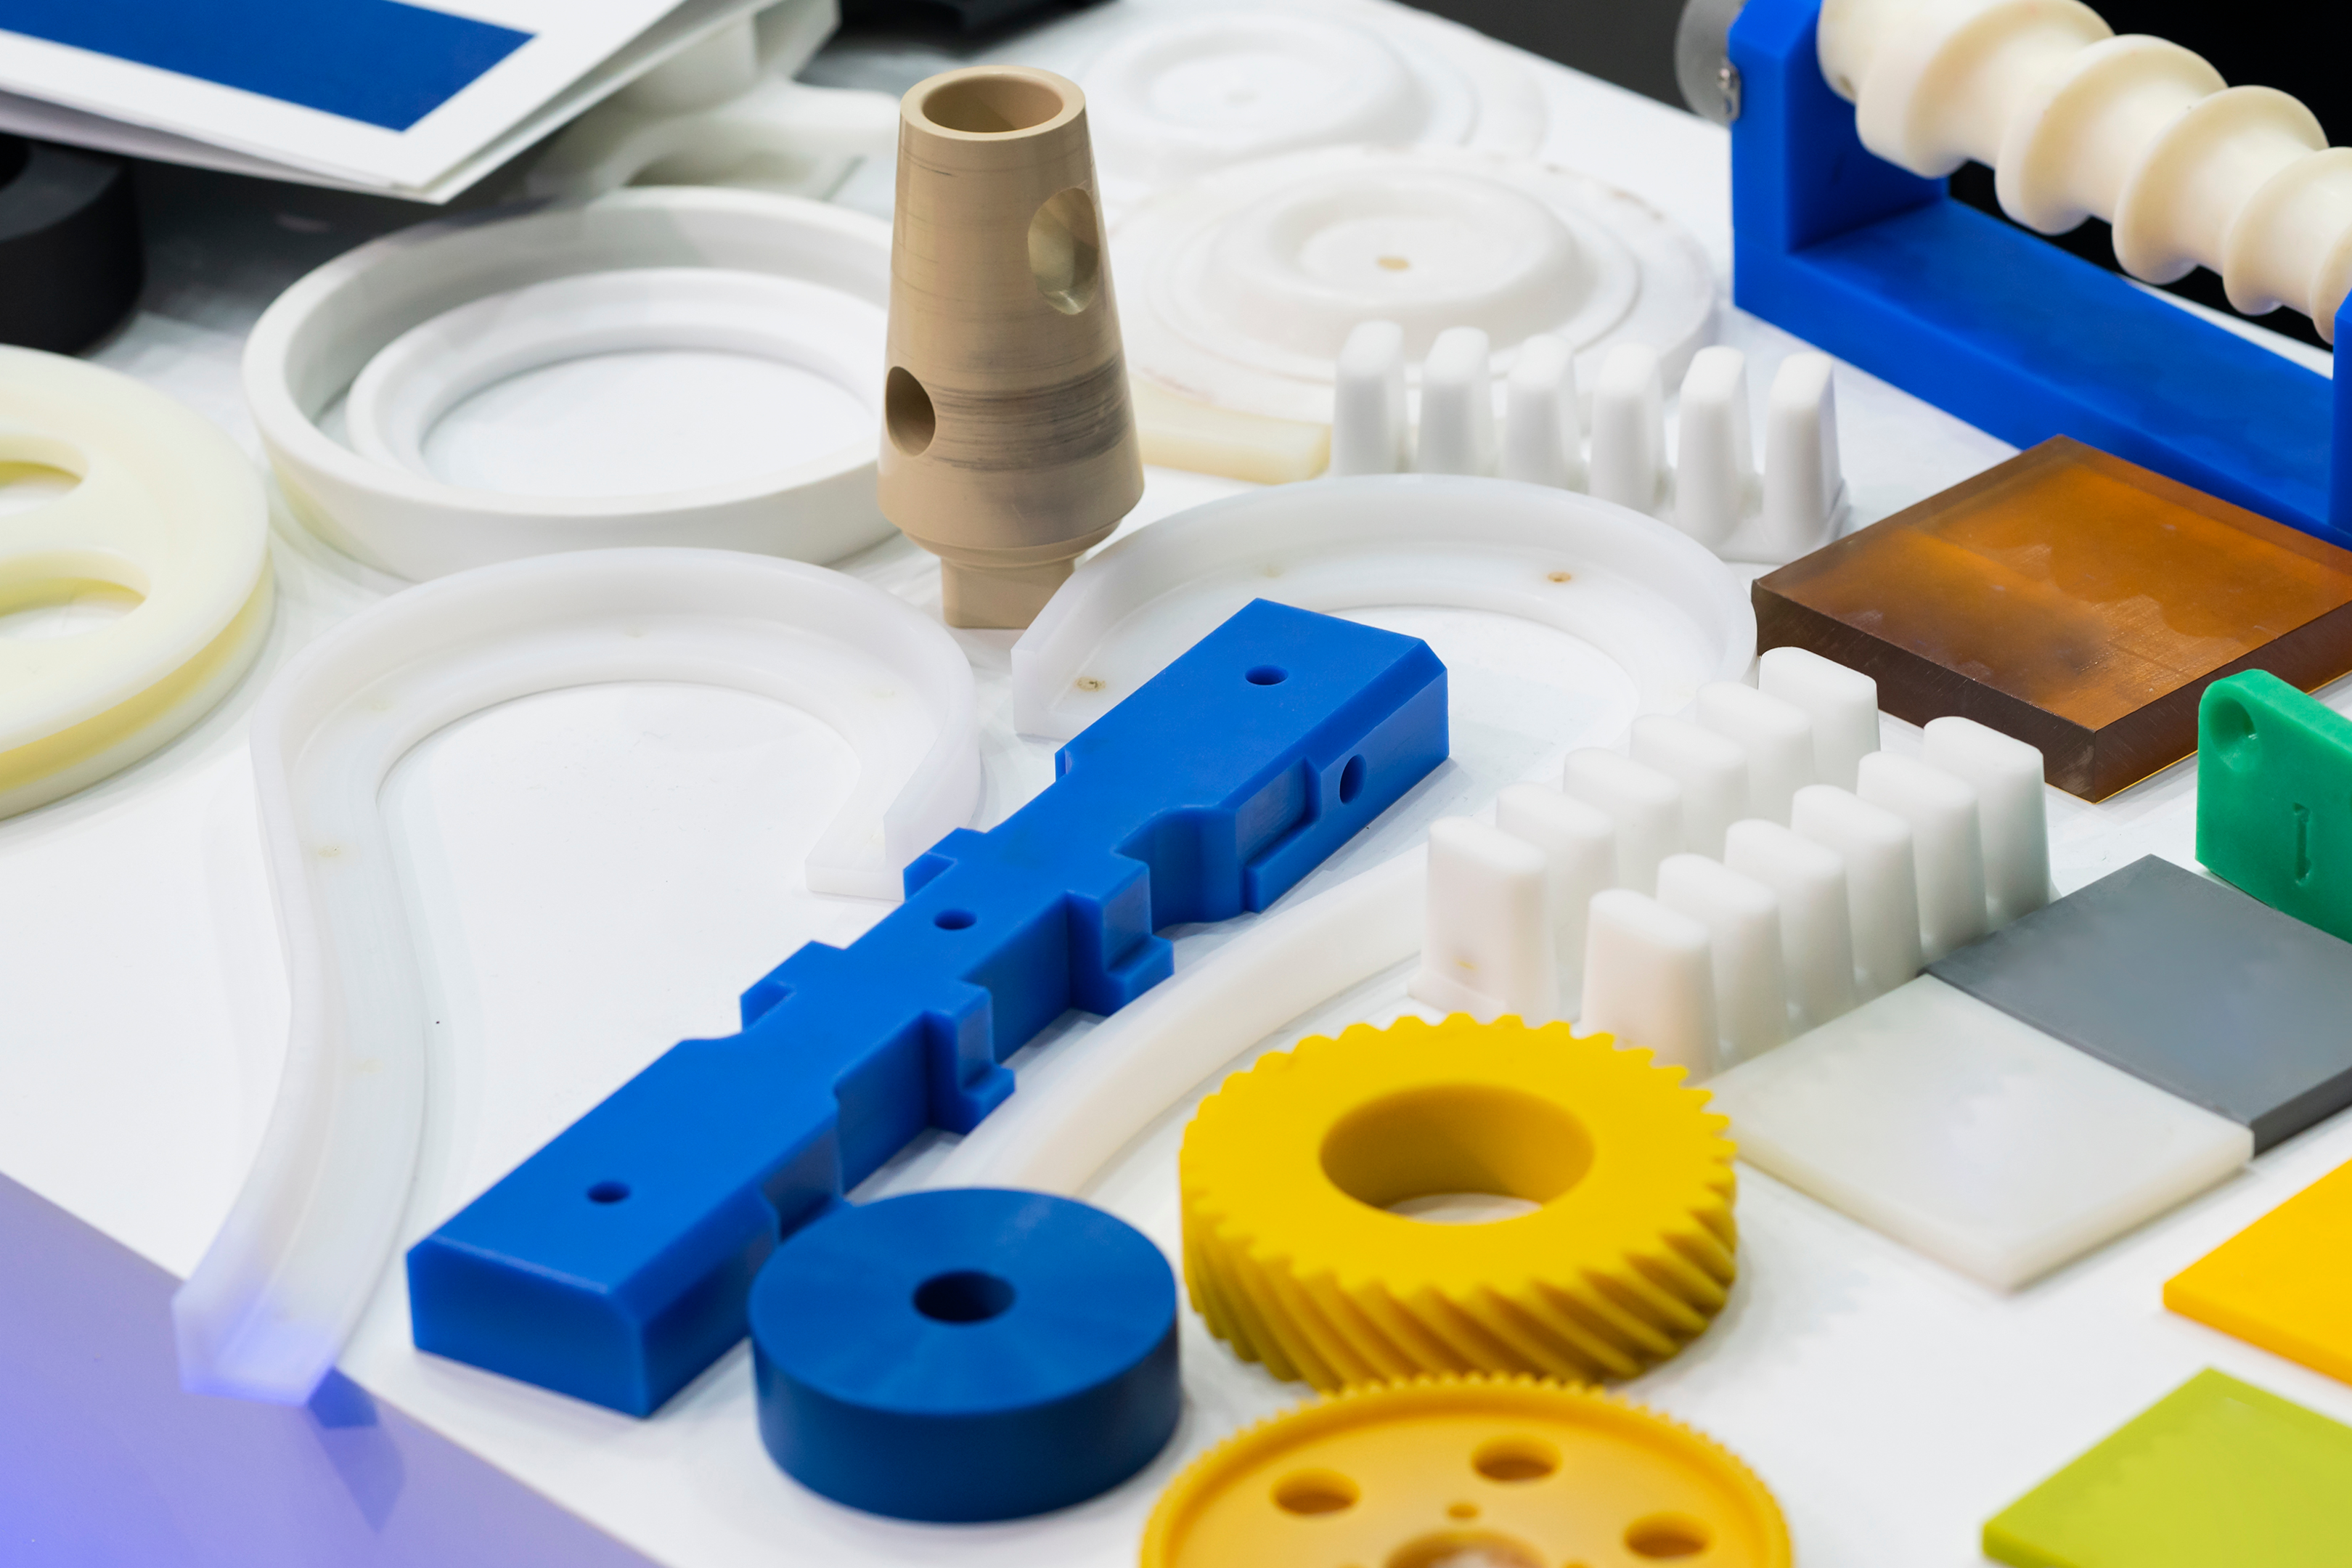 Variety of machined plastic parts